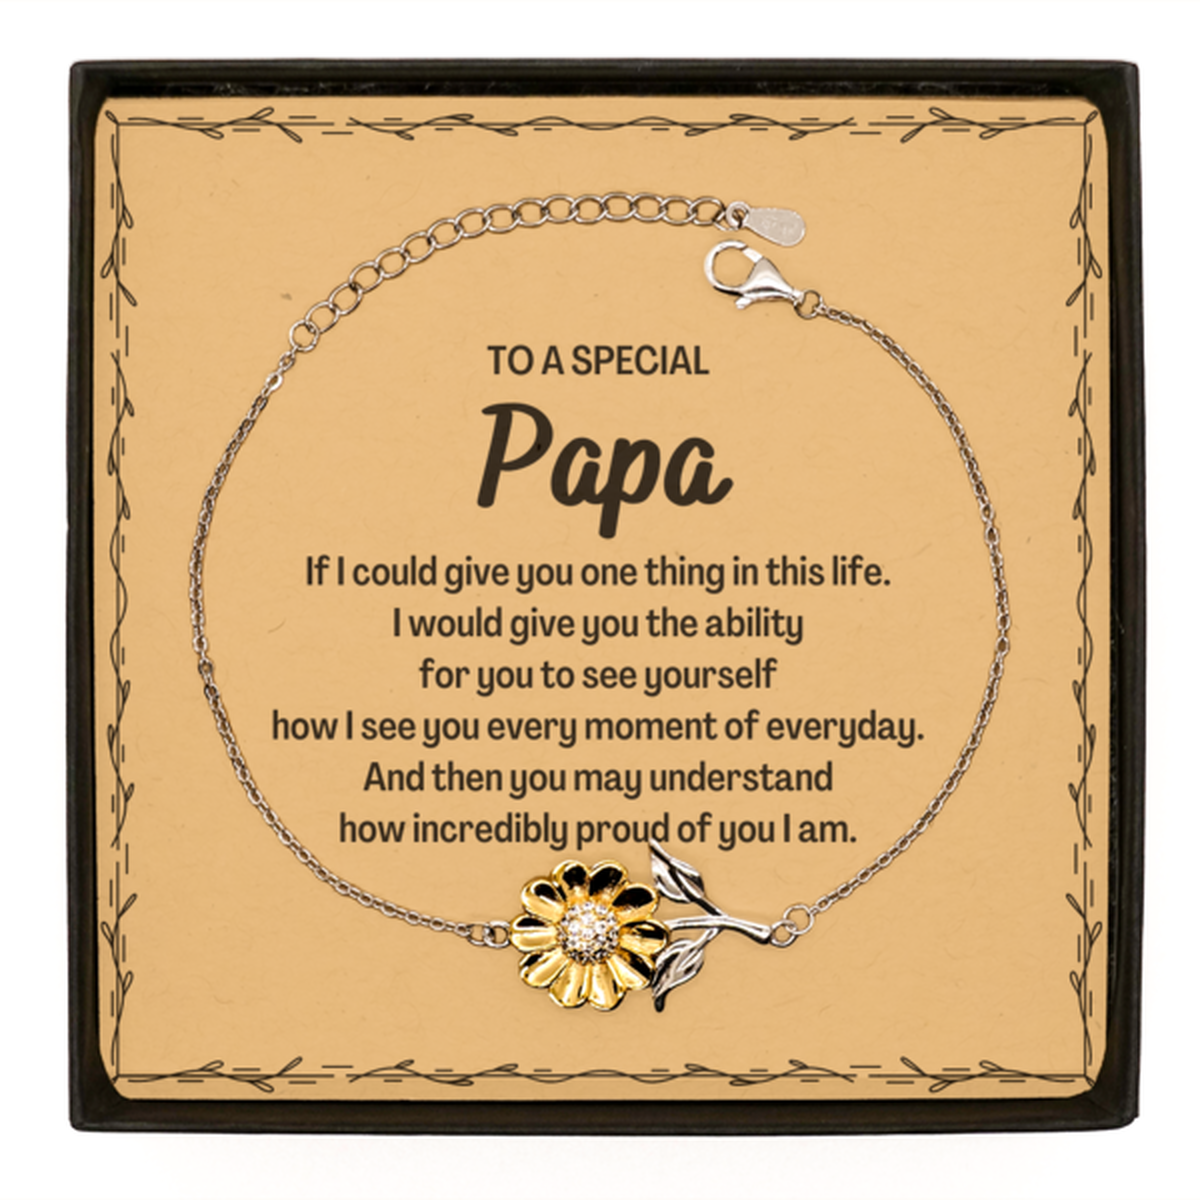 To My Papa Sunflower Bracelet, Gifts For Papa Message Card, Inspirational Gifts for Christmas Birthday, Epic Gifts for Papa To A Special Papa how incredibly proud of you I am